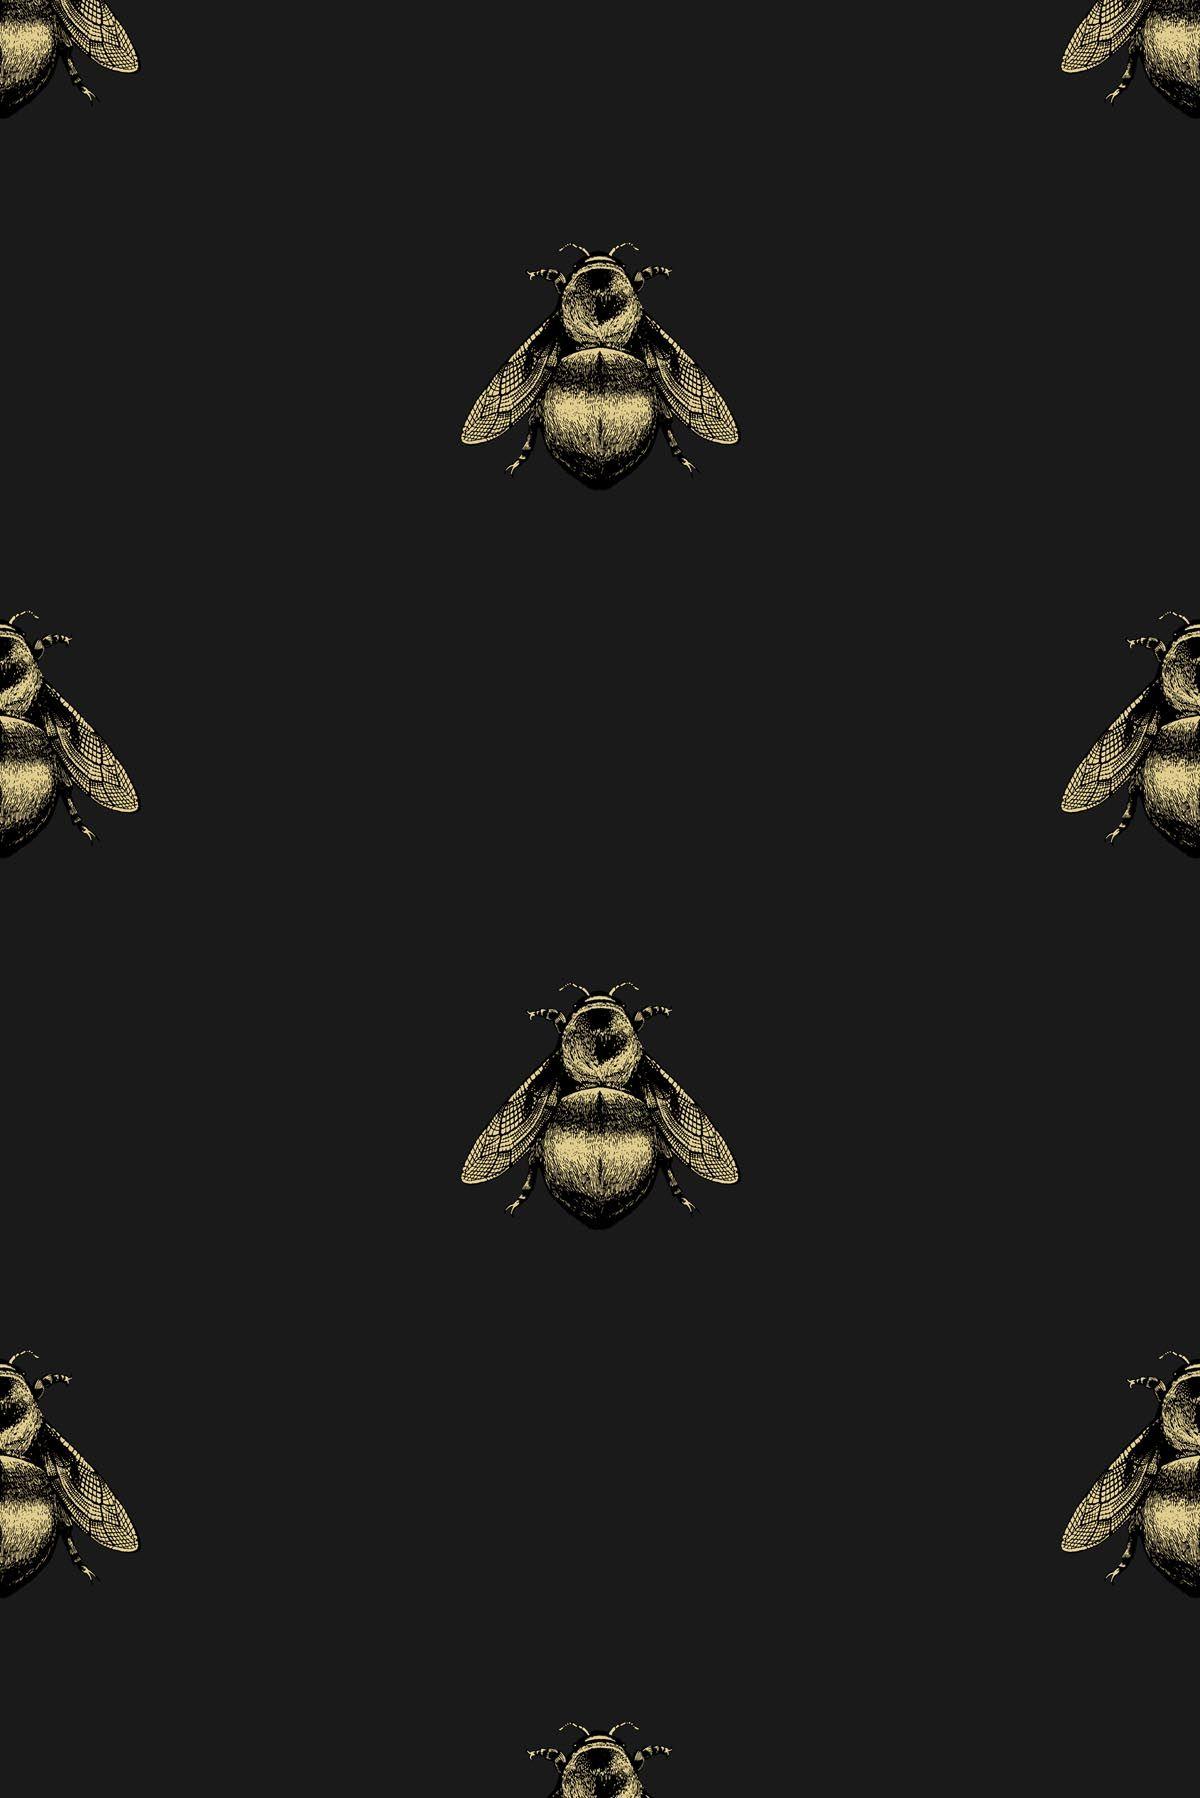 Im A Bee wallpaper Collection